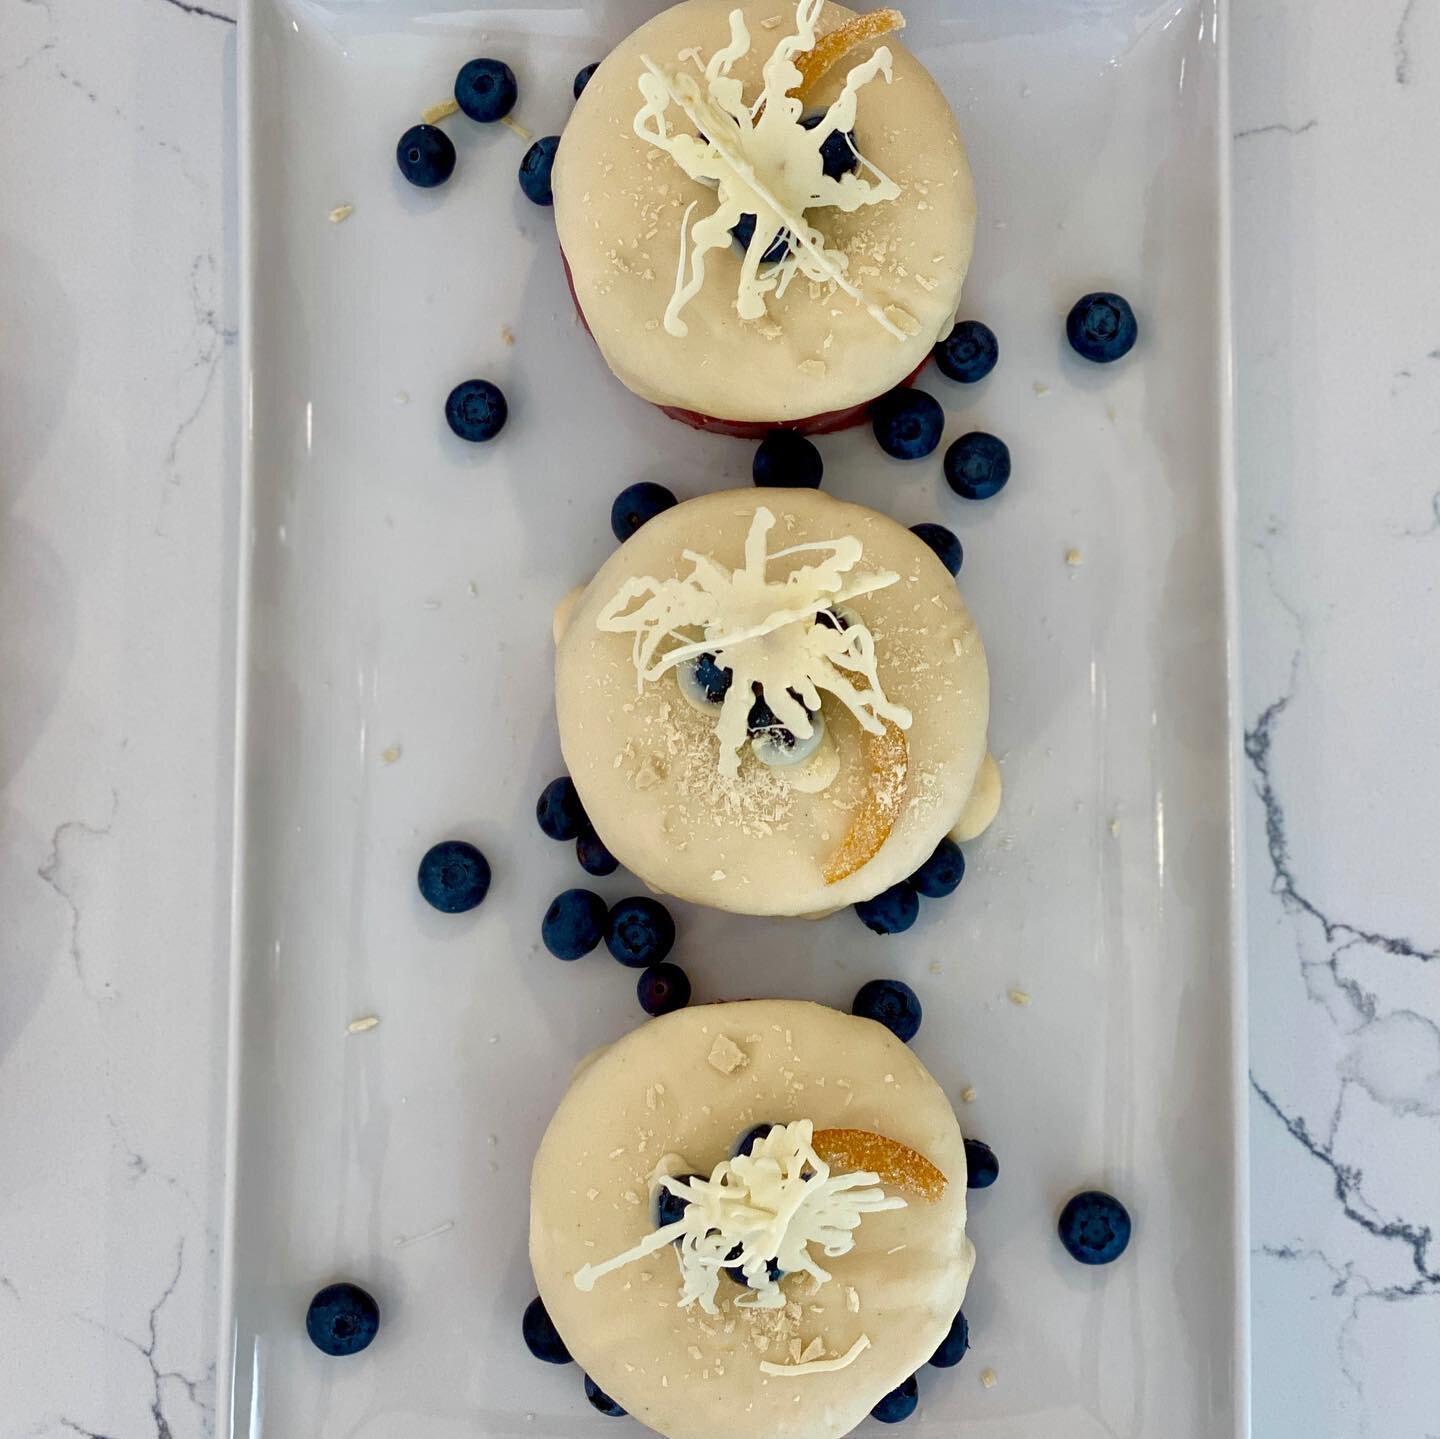 Happy Independence Day! 🍰 🎆 This year I made organic red, white, and blue treats, including deconstructed strawberry shortcake mousse and these mini cakes (decorated with white chocolate fireworks inspired by Melissa @ mycakeschool )⁣
.⁣
.⁣
.⁣
#4th